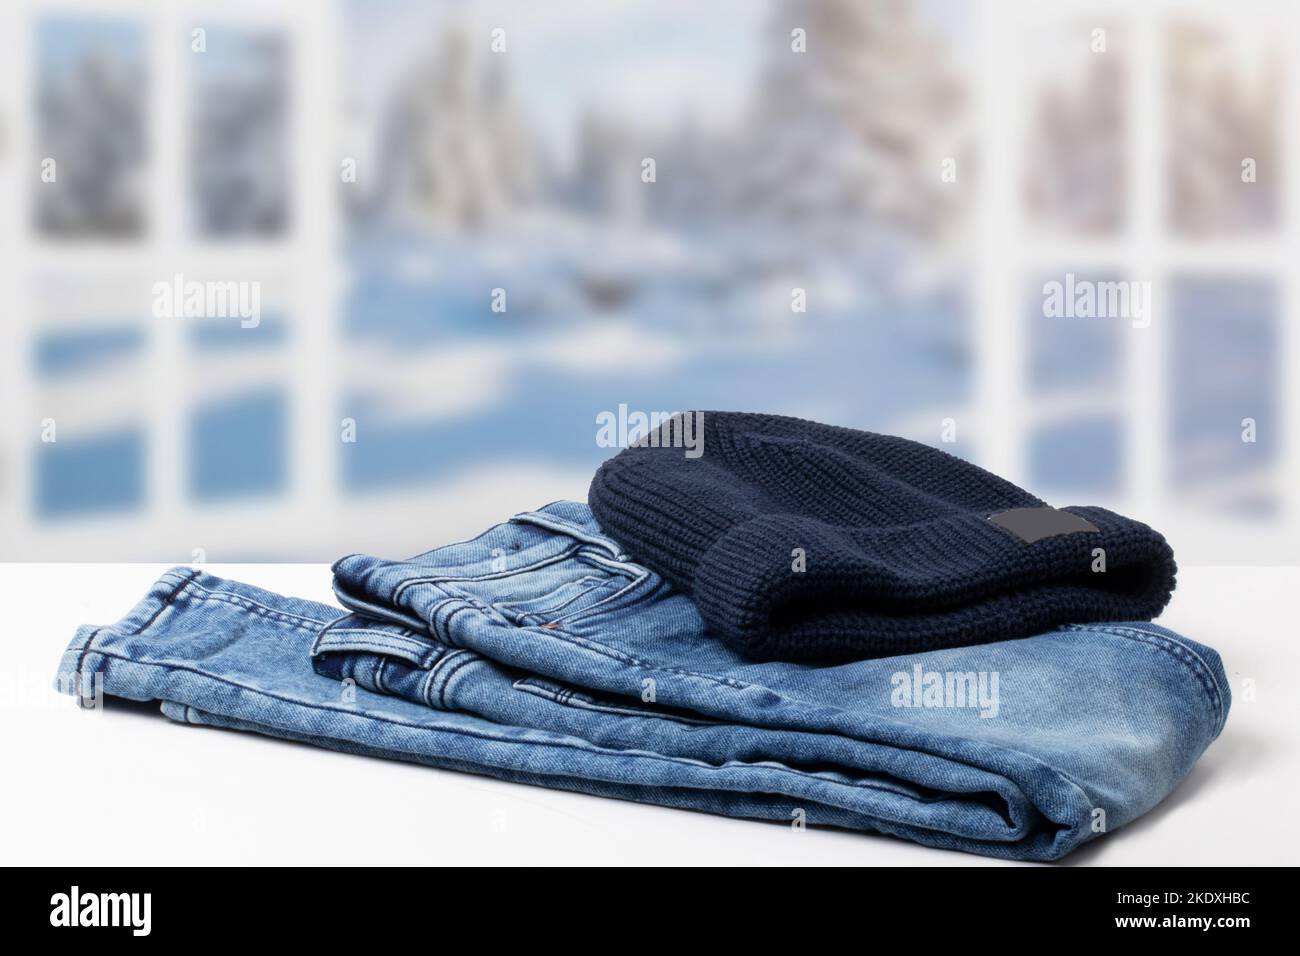 Autumn clothes. Fashionable folded jeans and a knitted blue Rapper, Beanie or Baseball hat or cap on table over abstract blurred winter landscape. Cop Stock Photo